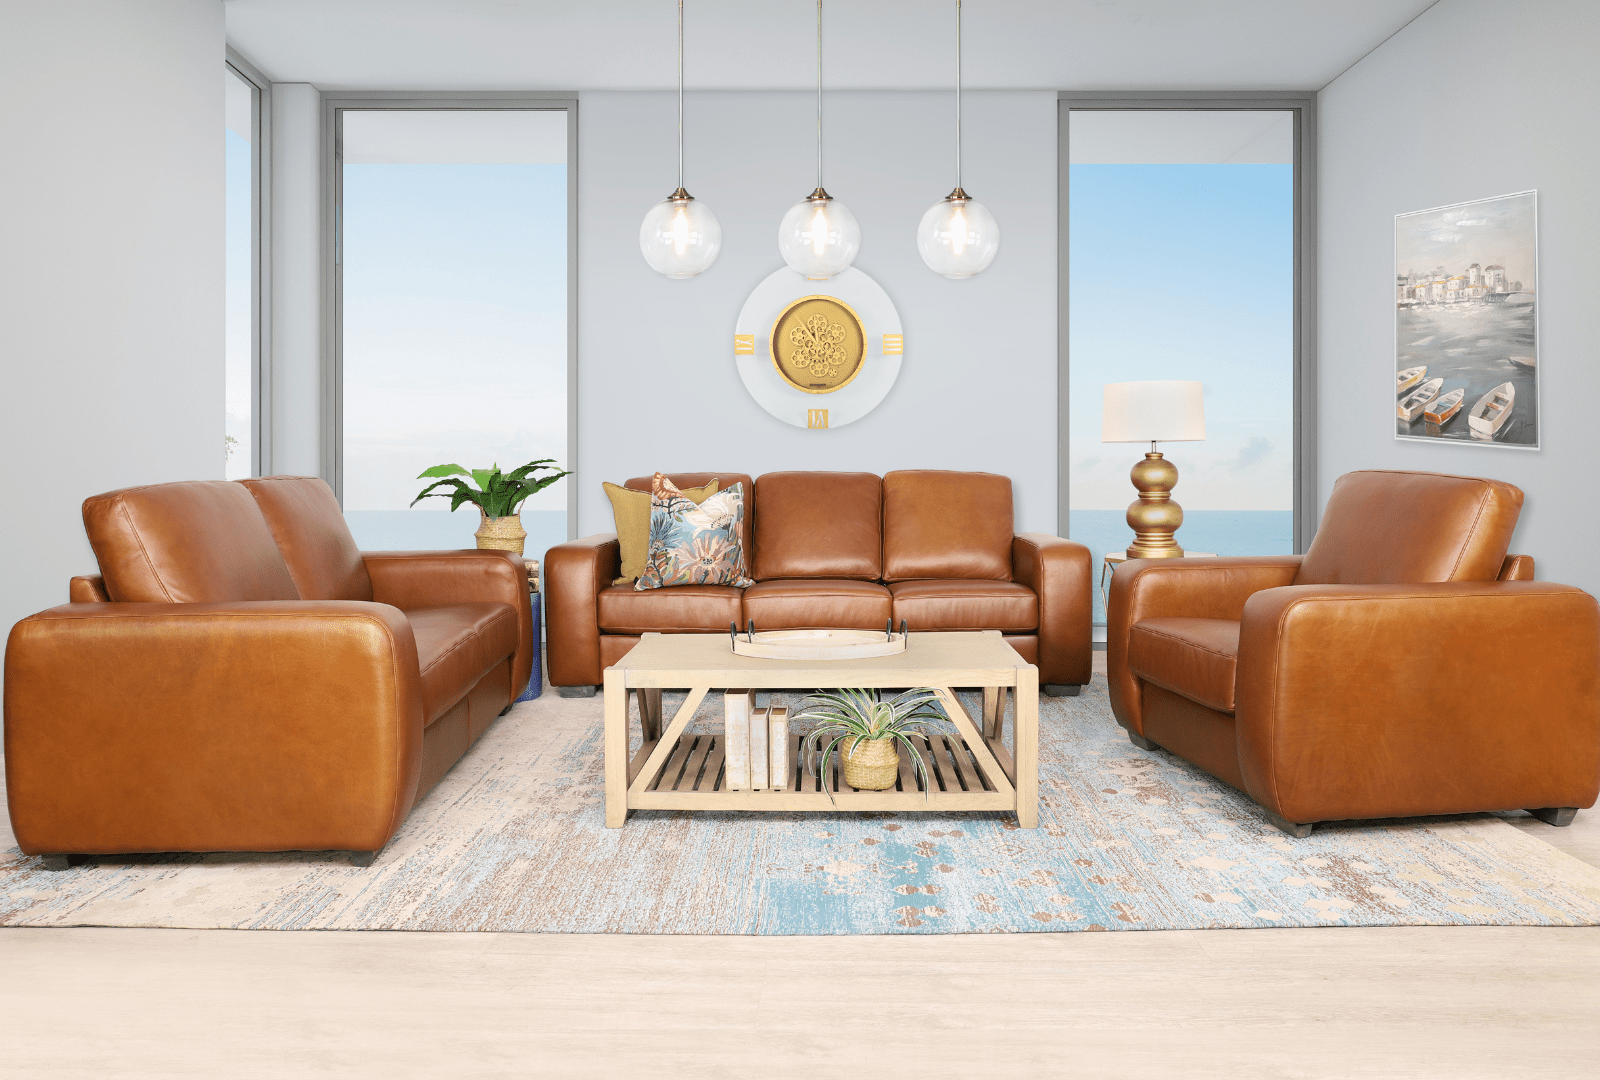 5 Key Tips On Accessorising Your Light Brown Leather Couch: Scatter Cushions, Throws, and Décor Ideas